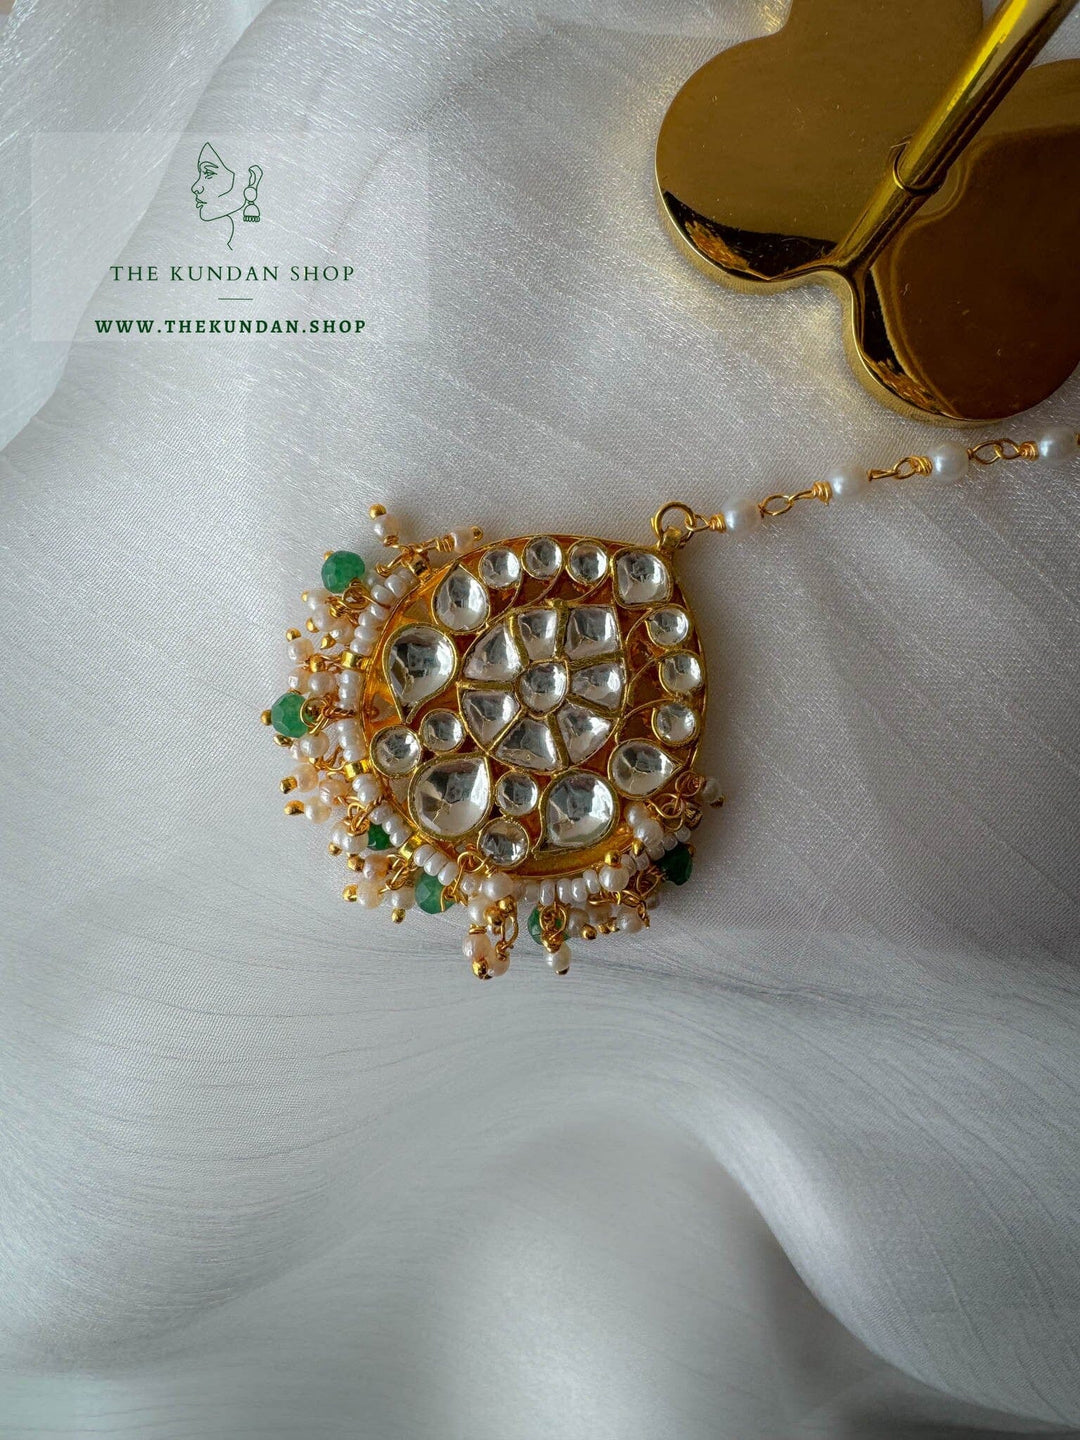 Lucky Chance in Kundan Necklace Sets THE KUNDAN SHOP 